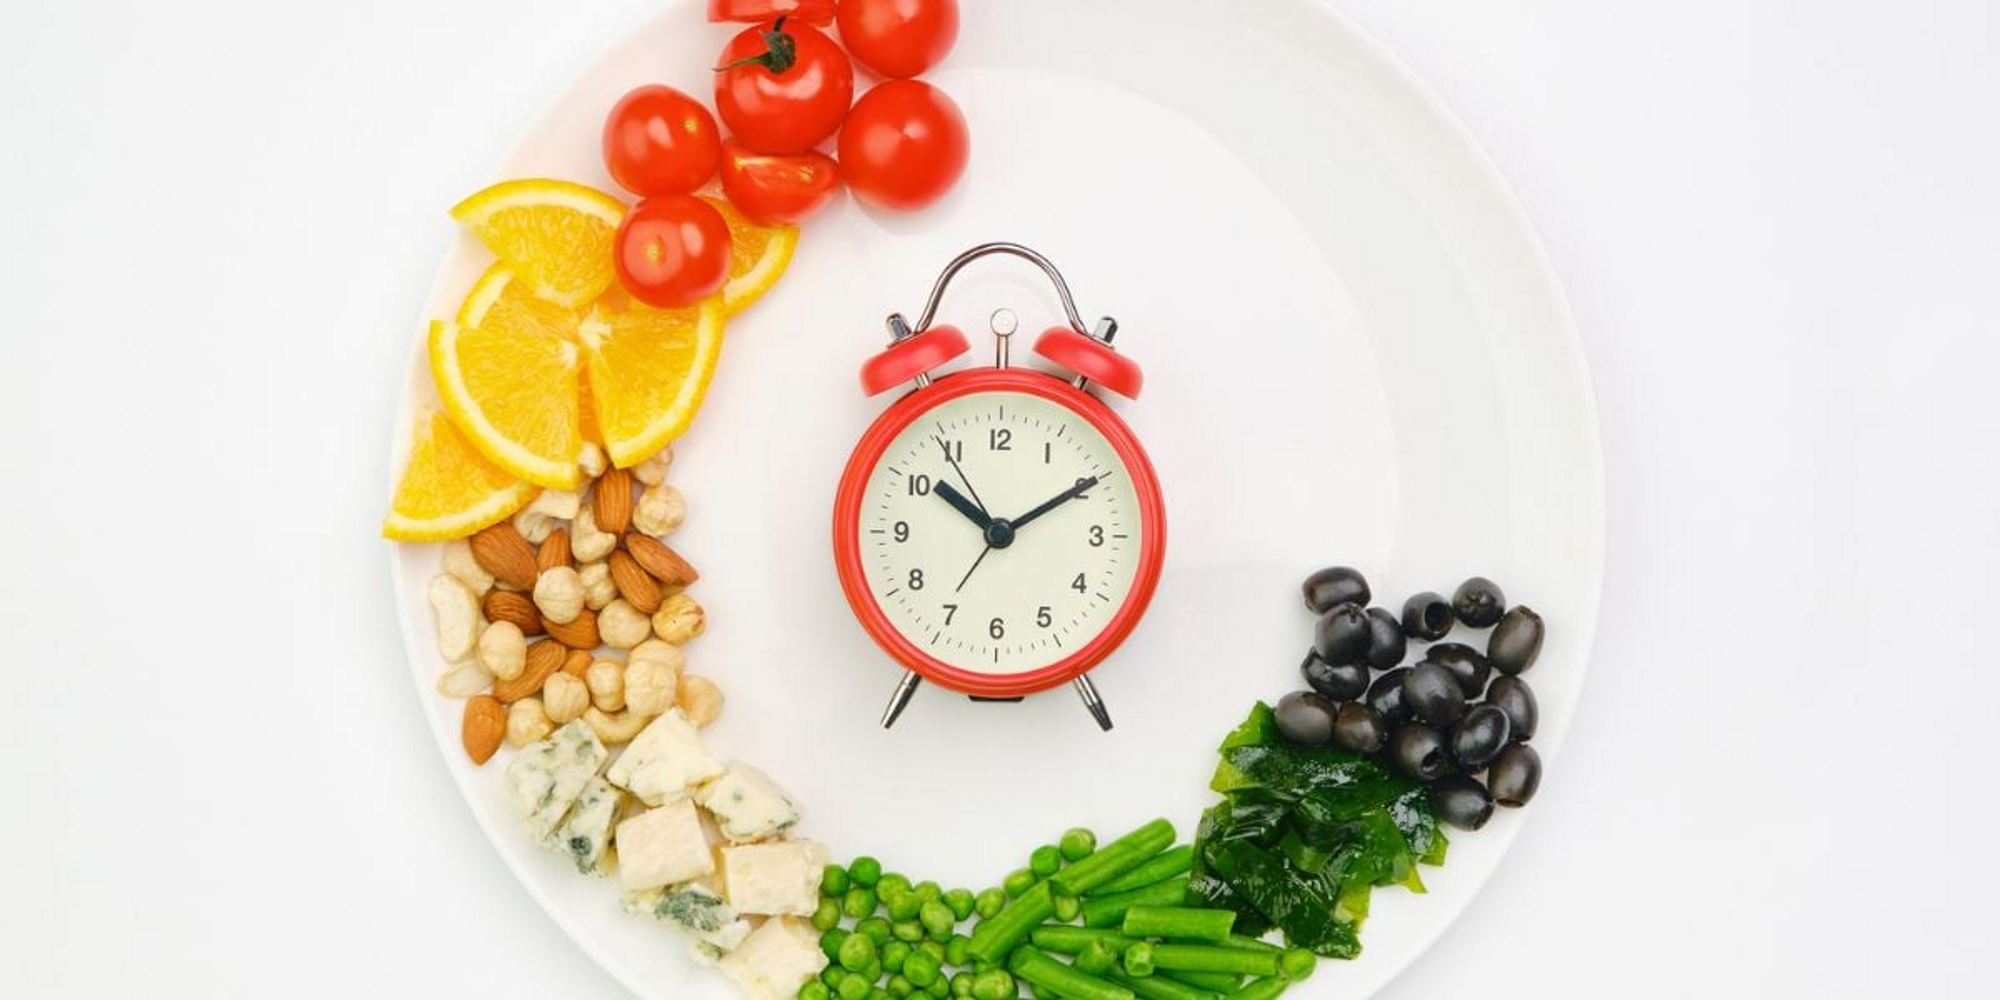 Clock with fruits, nuts and vegetables